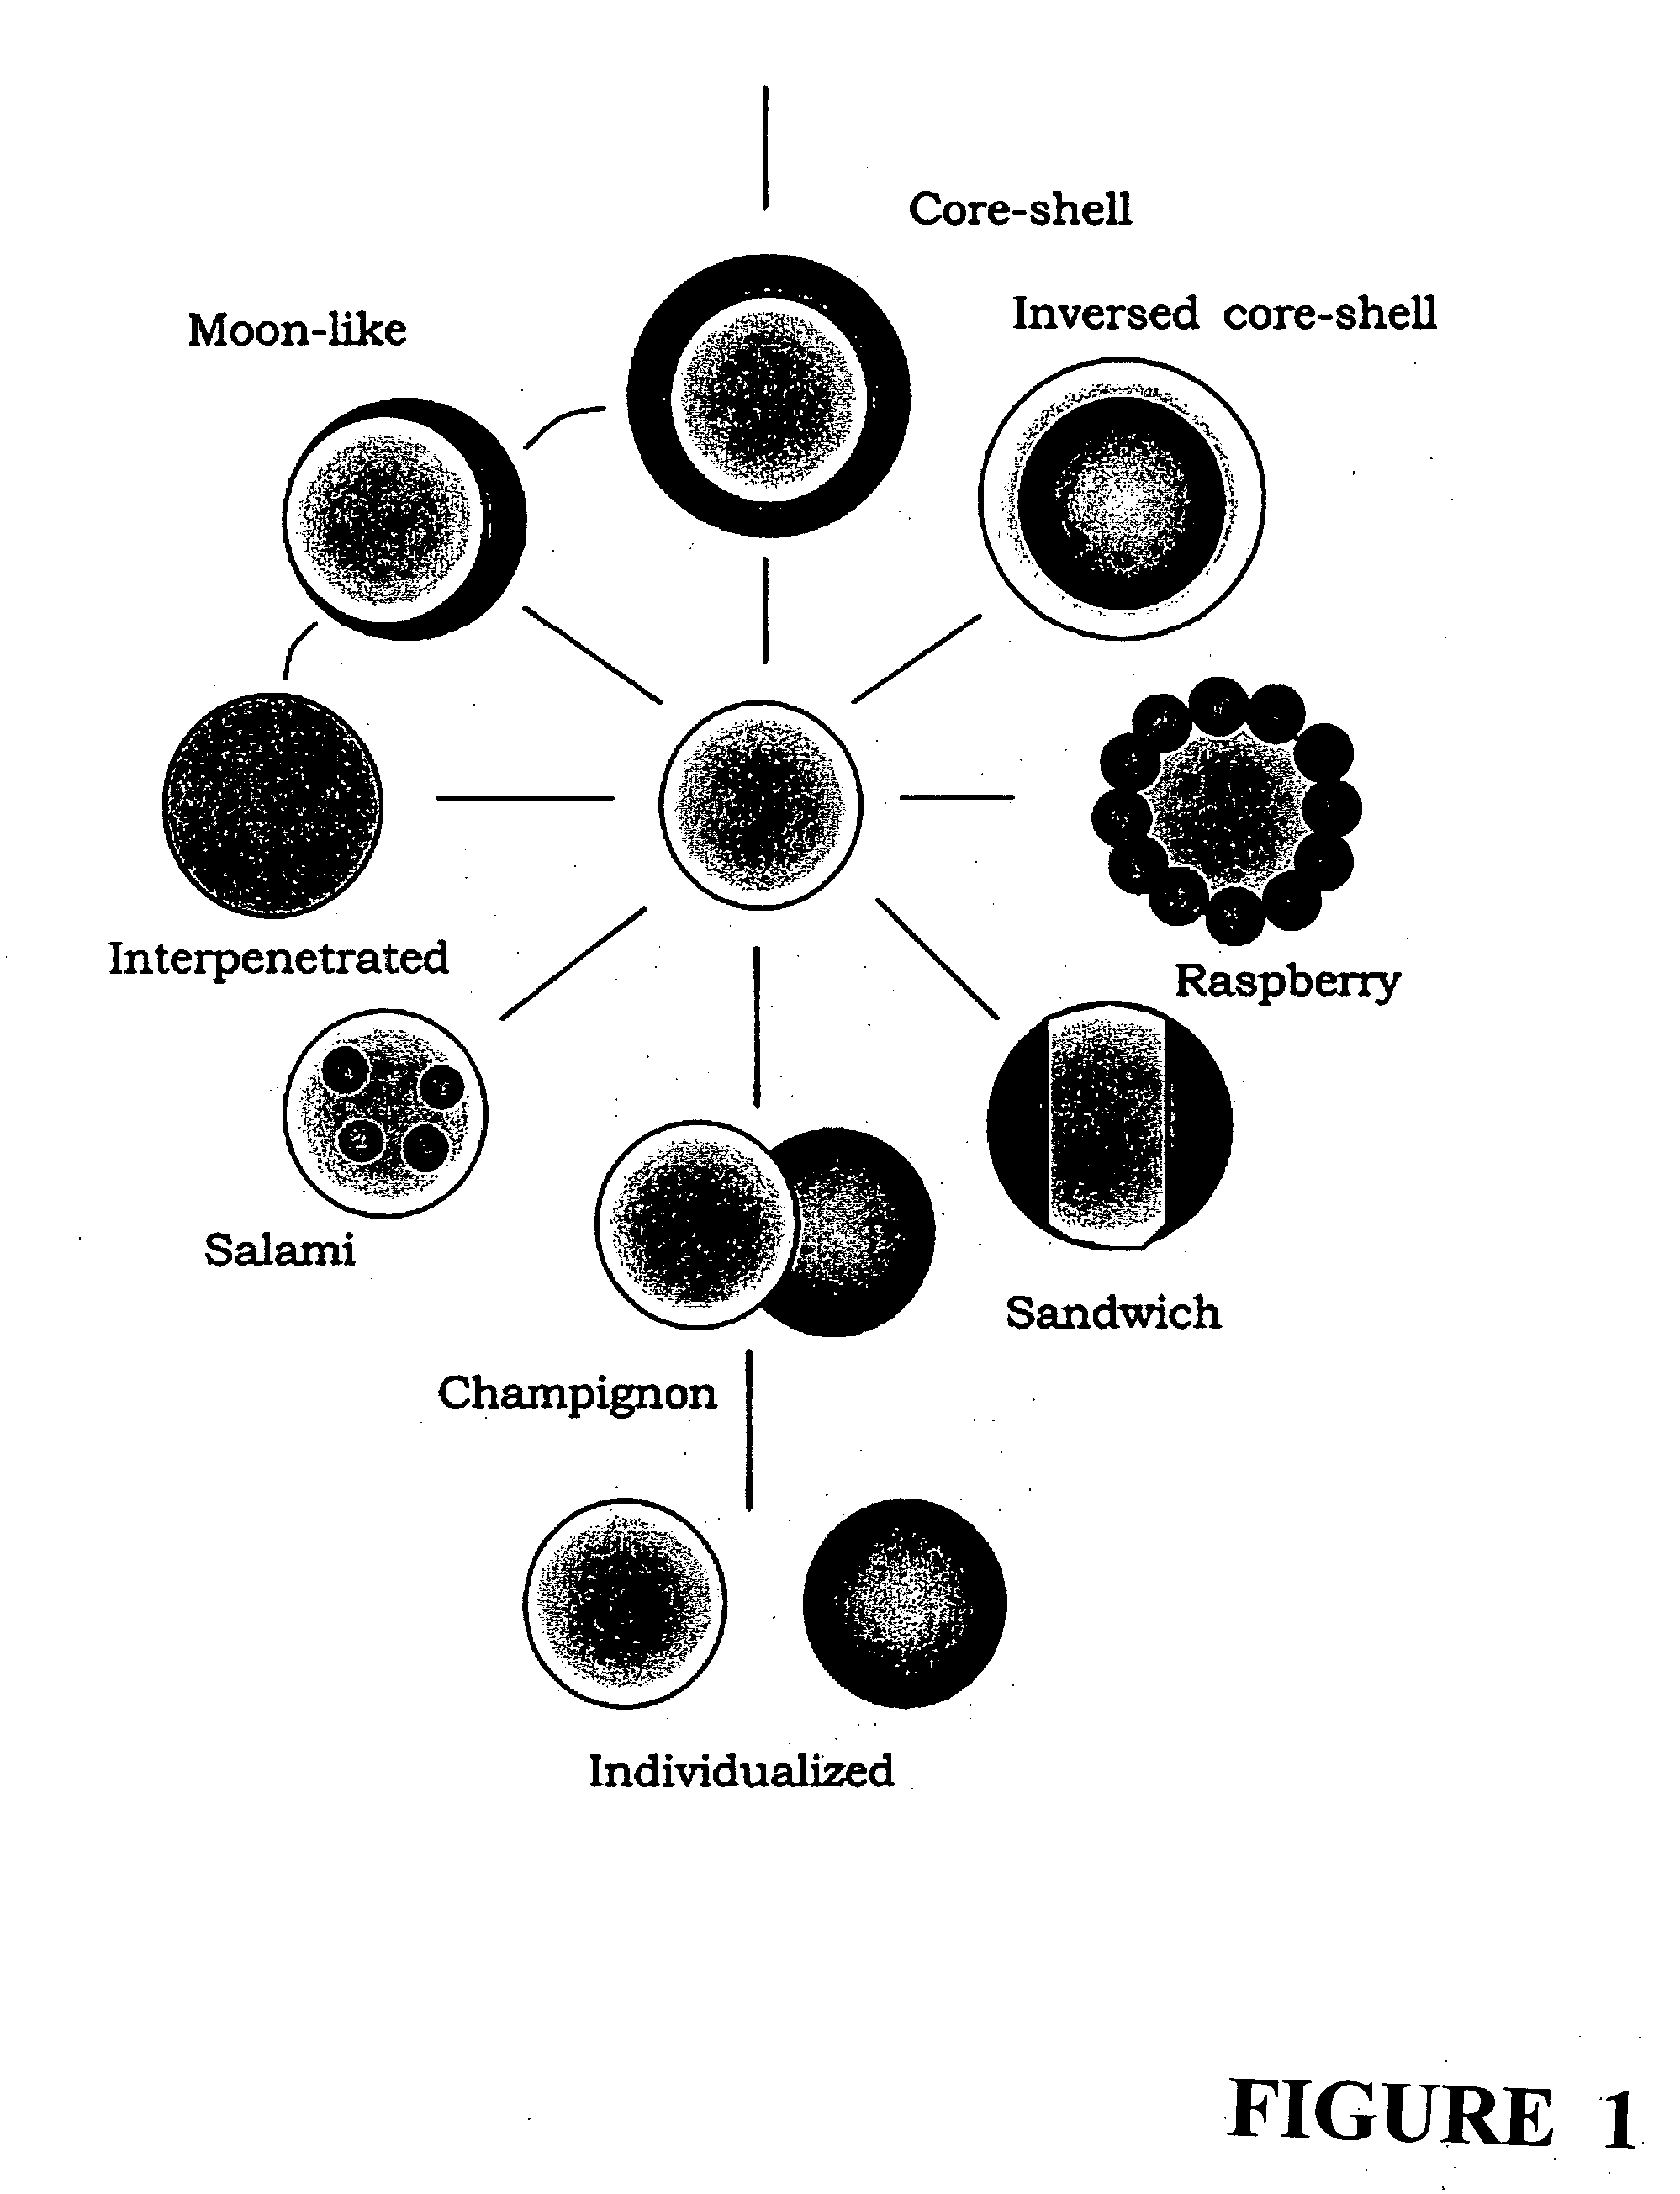 Hair styling compositions comprising adhesive particles and non-adhesive particles